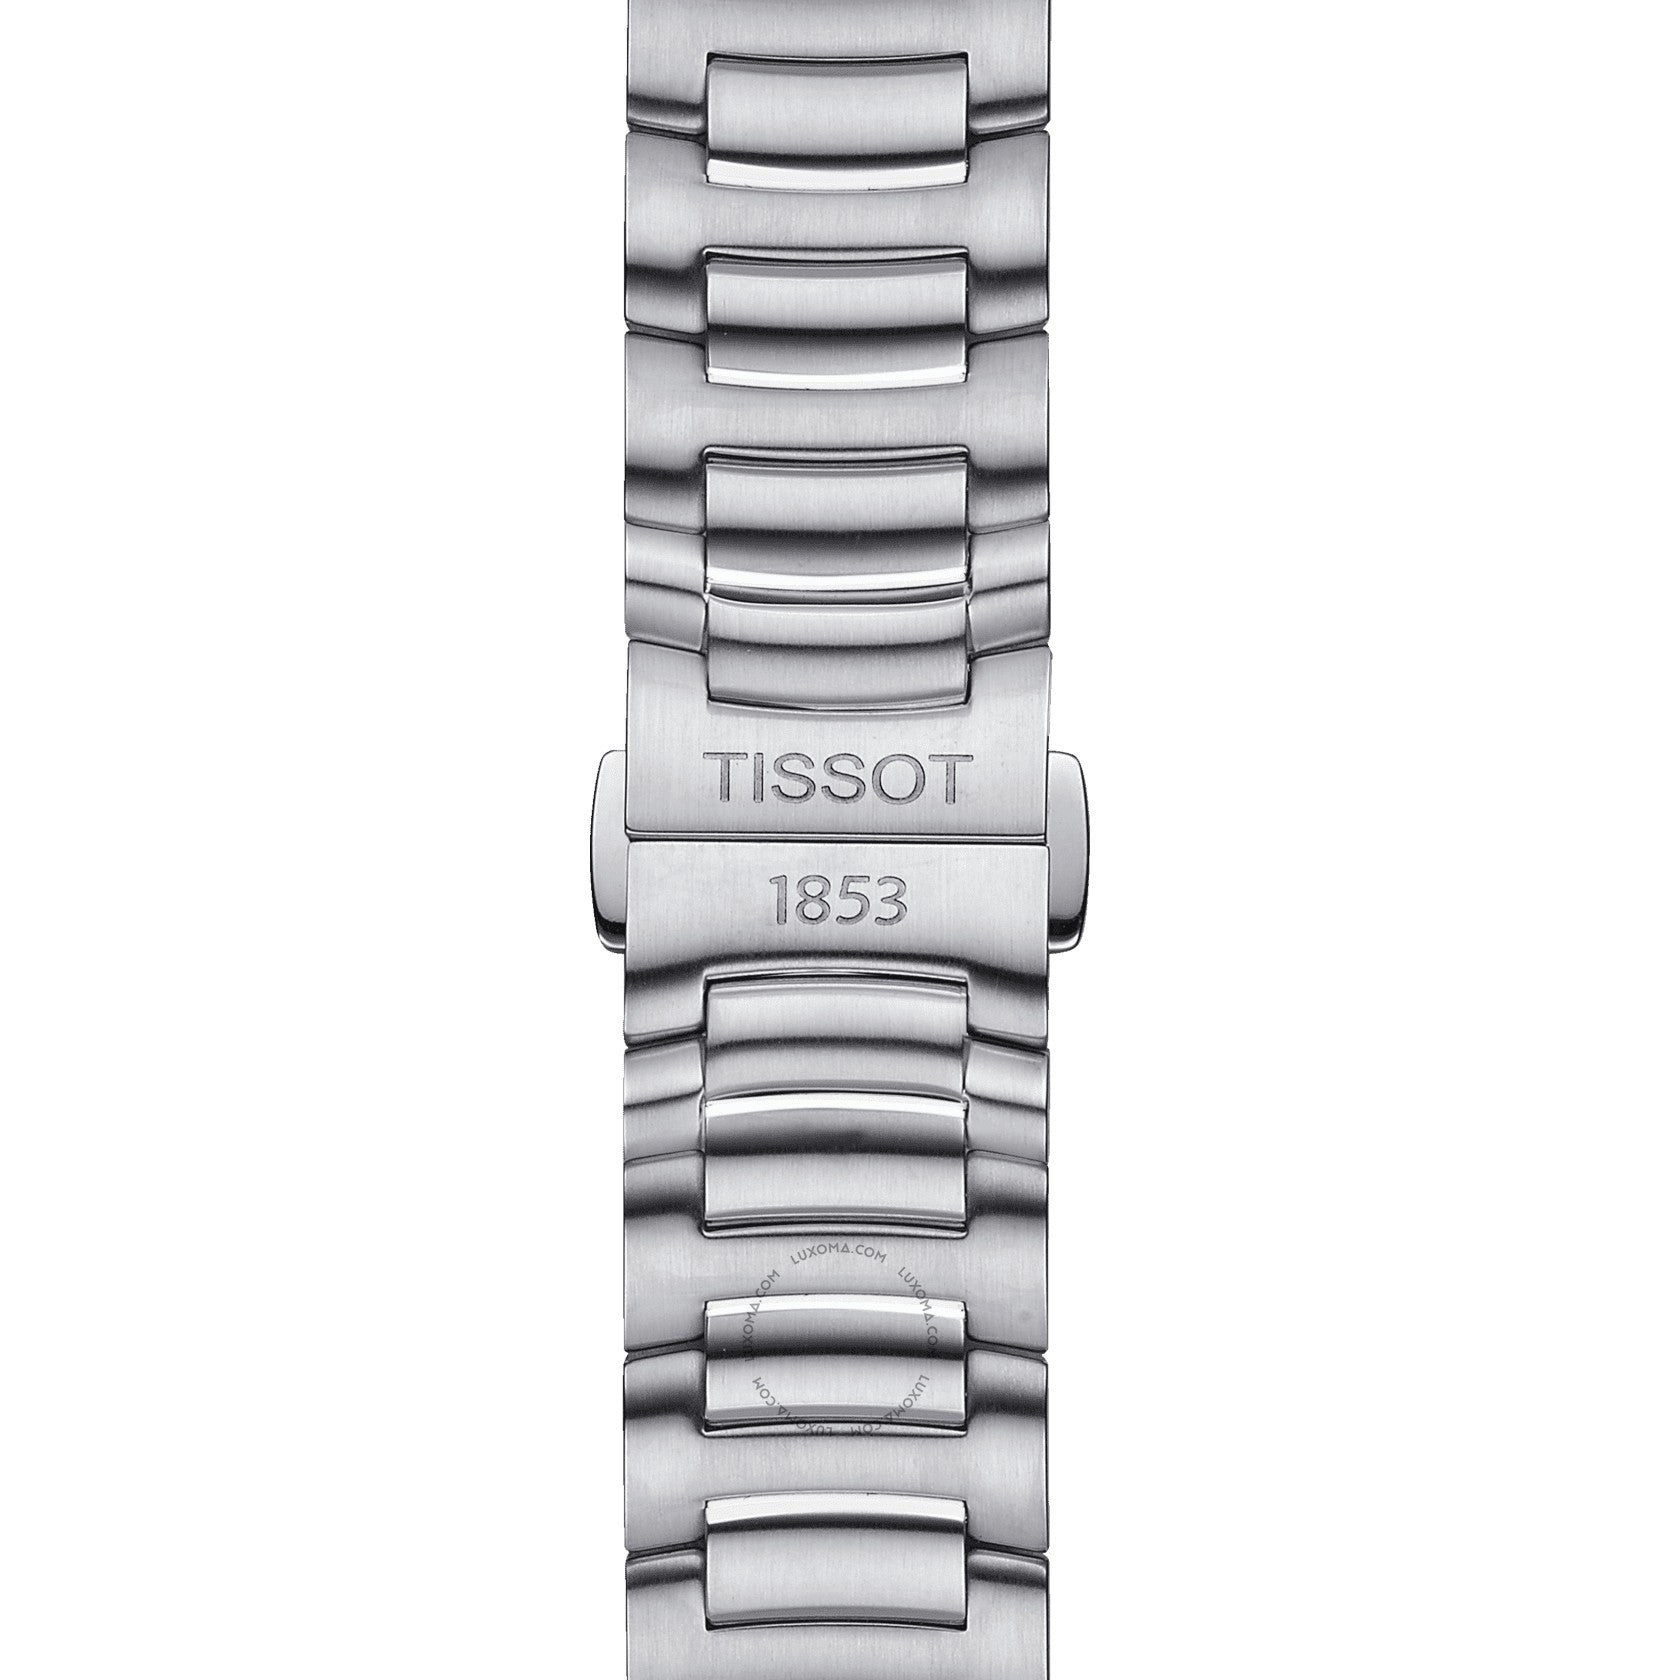 Tissot Tissot T-Touch Expert Solar Chronograph Black Mother of Pearl Dial Ladies Watch T075.220.11.106.01